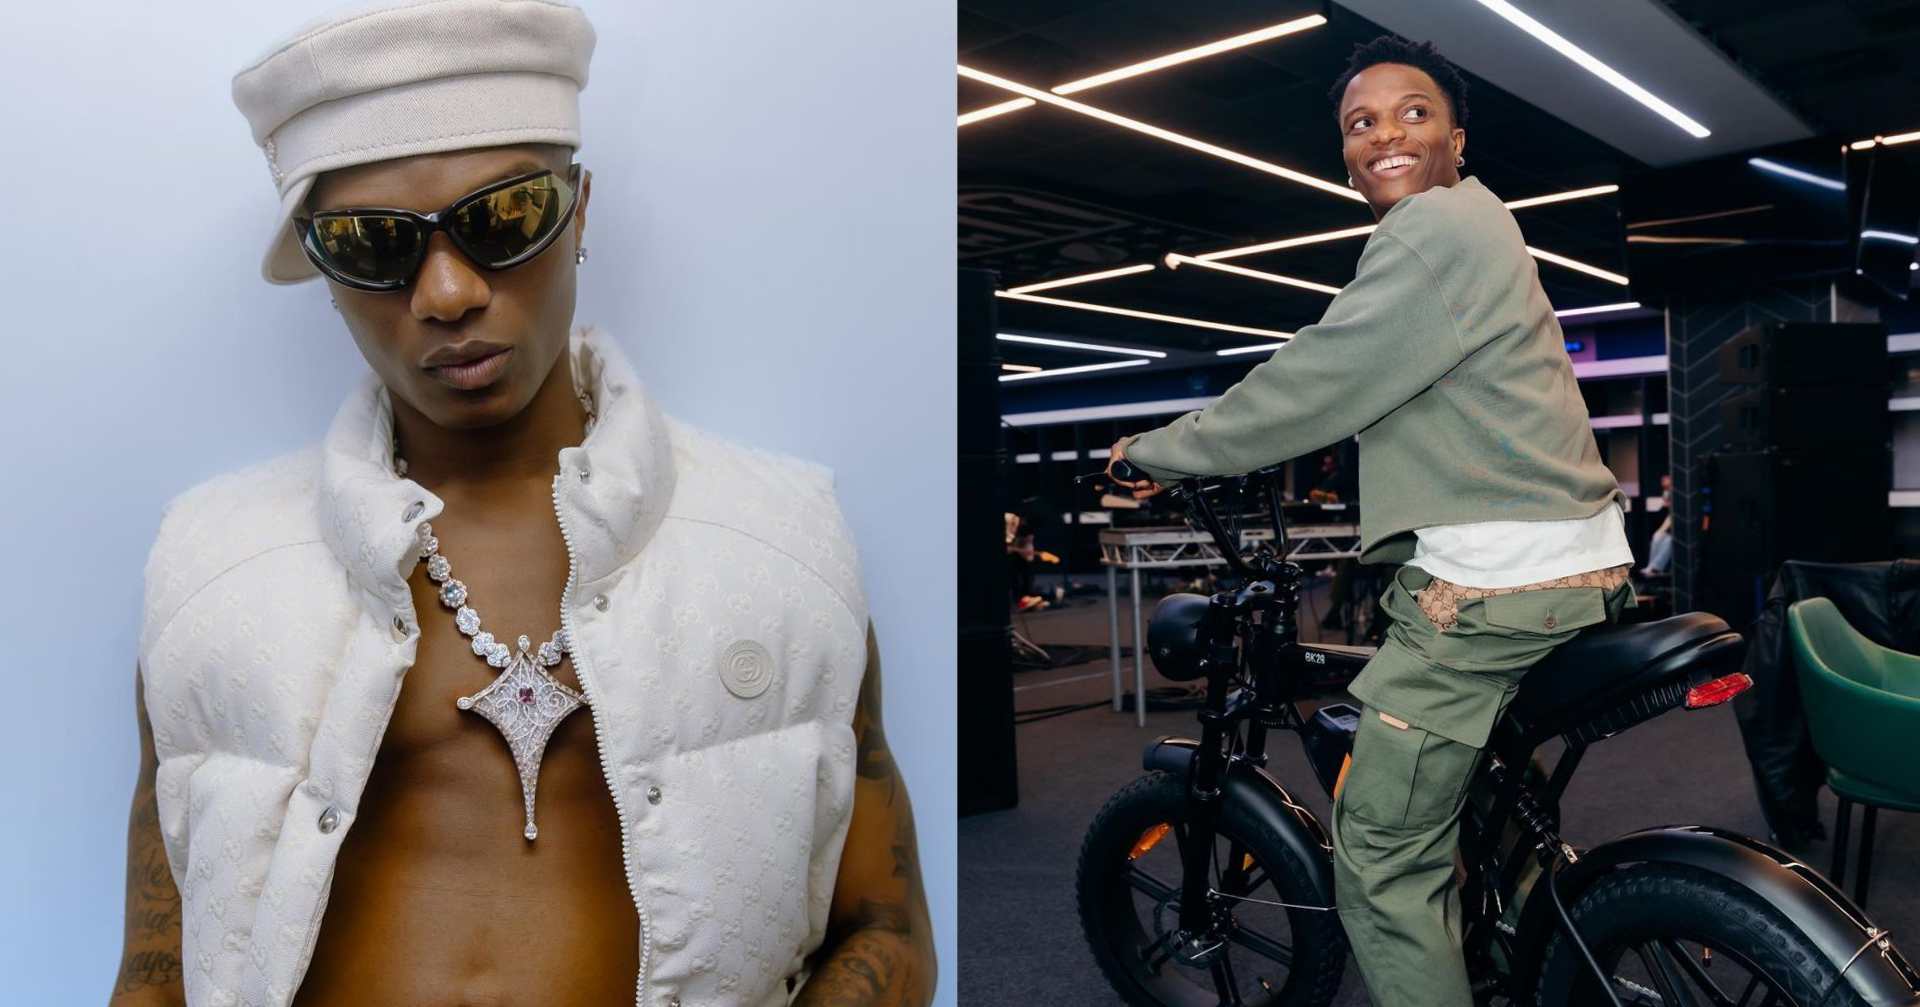 Wizkid’s Vacation Plans: A 6-Year Getaway to Explore Action Movie Acting